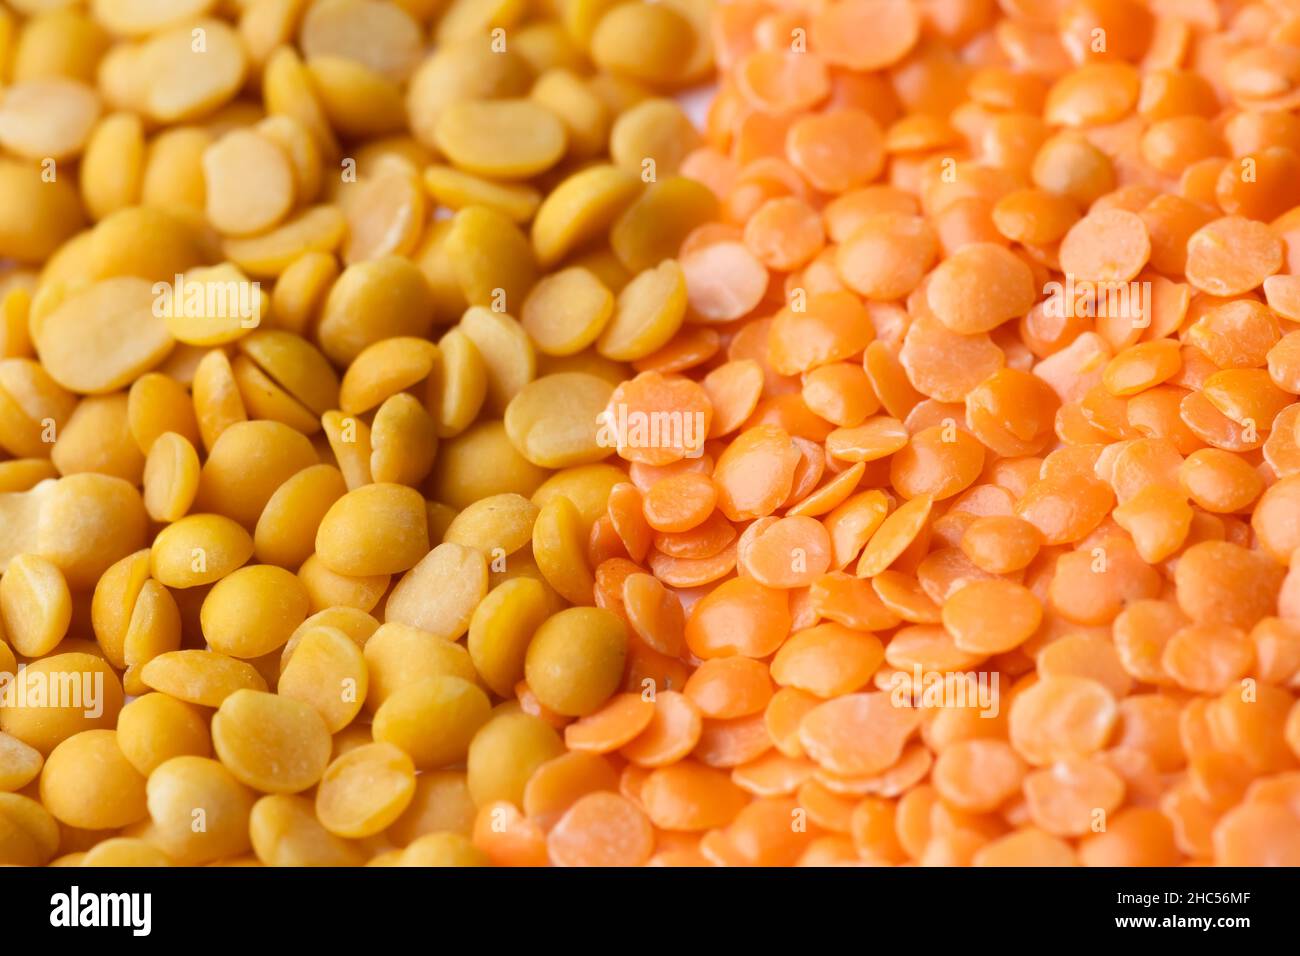 pegion pea and lentil pulses in full frame. Used selective focus. Stock Photo